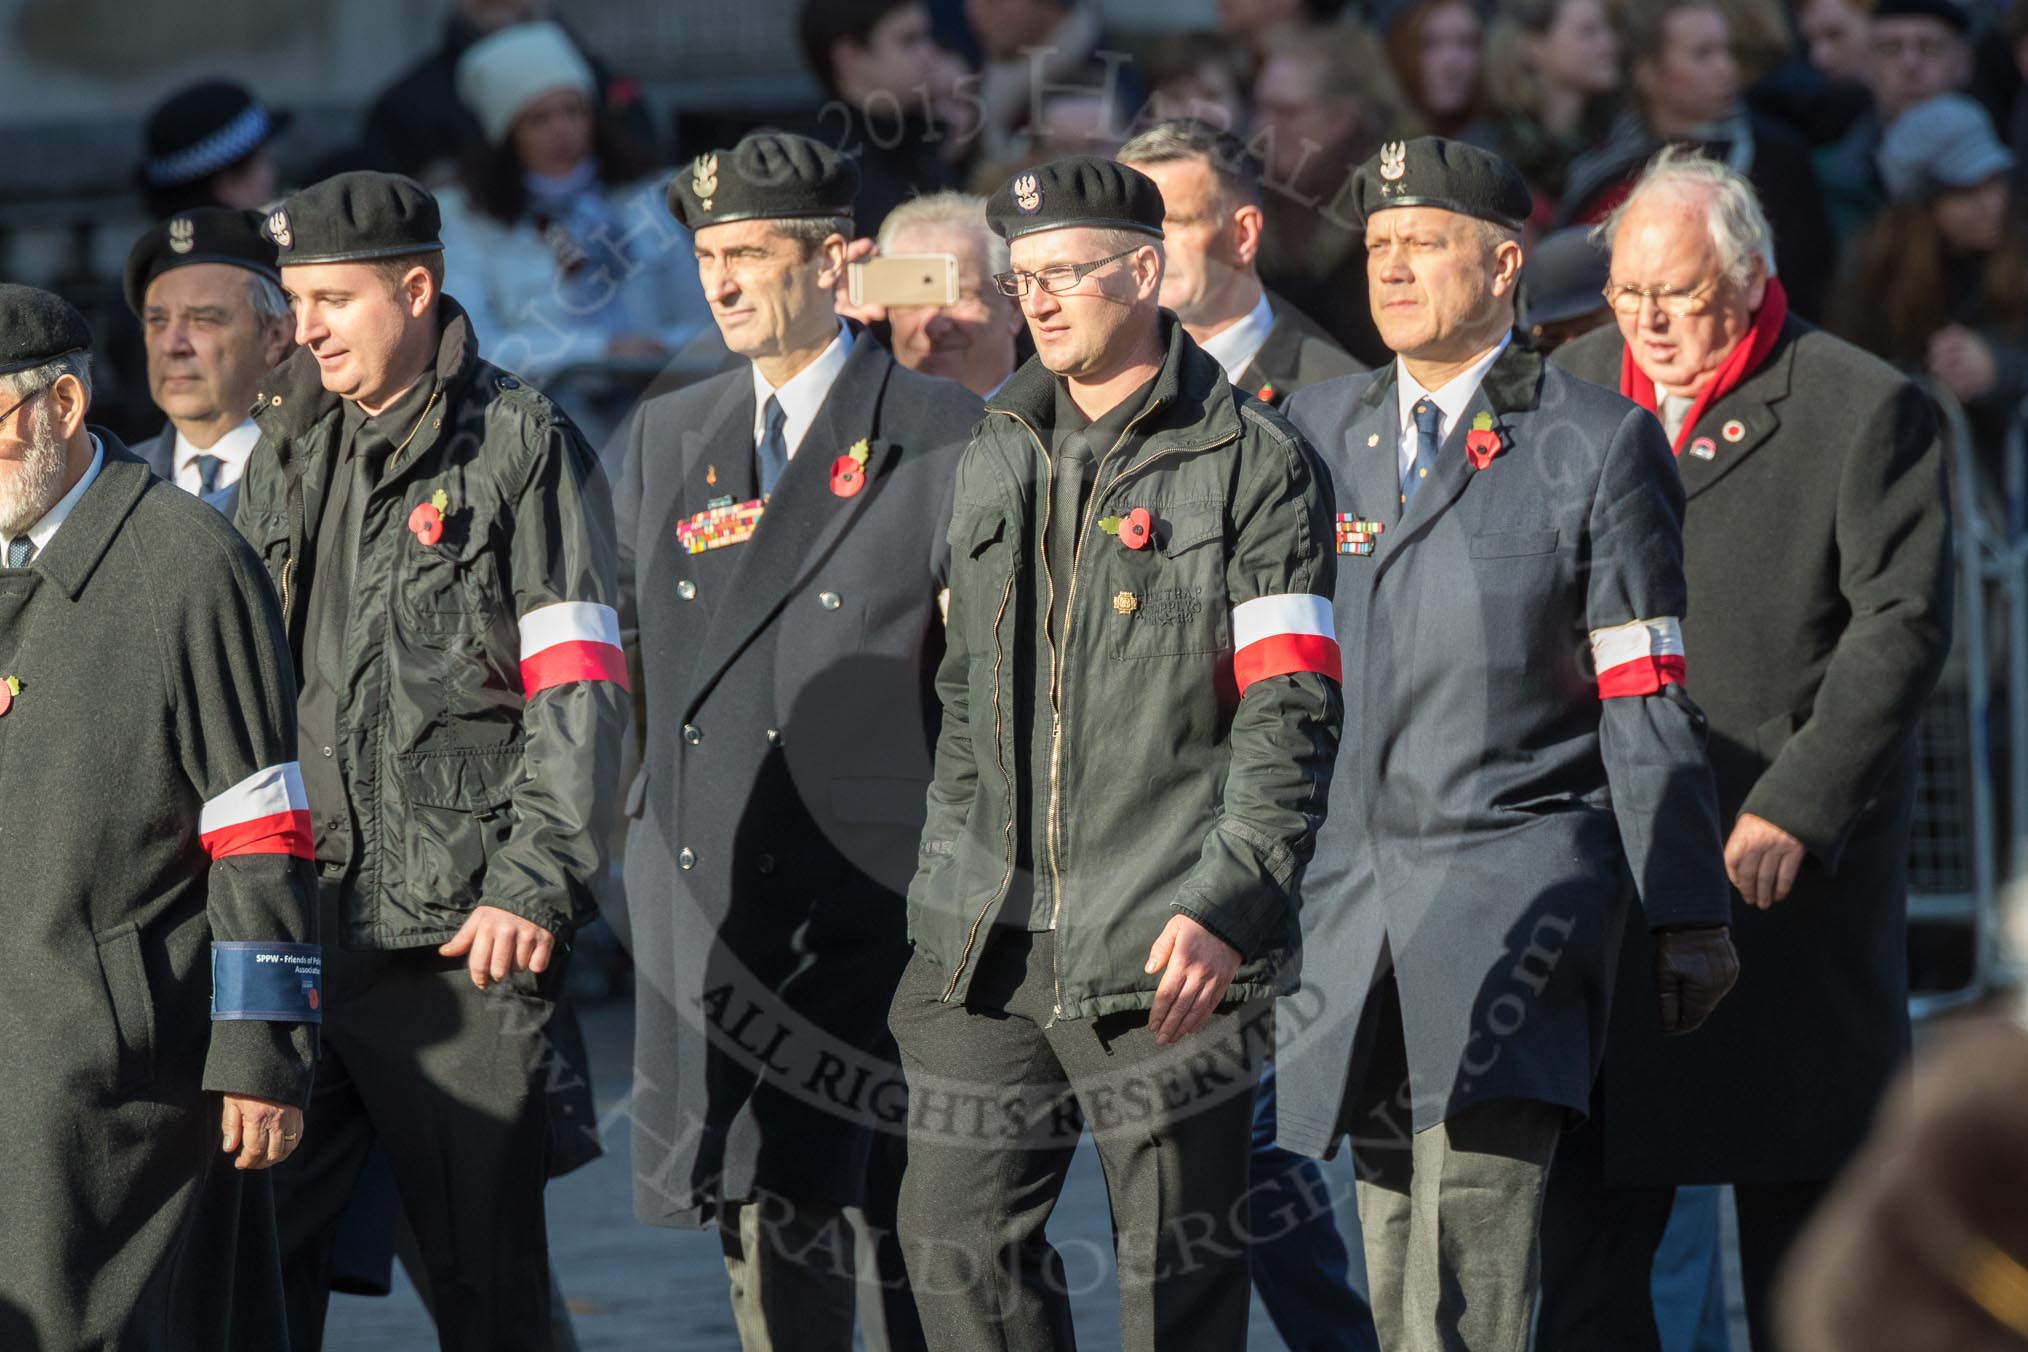 March Past, Remembrance Sunday at the Cenotaph 2016: M42 SPPW - Friends of Polish Veterans Association.
Cenotaph, Whitehall, London SW1,
London,
Greater London,
United Kingdom,
on 13 November 2016 at 13:19, image #2980